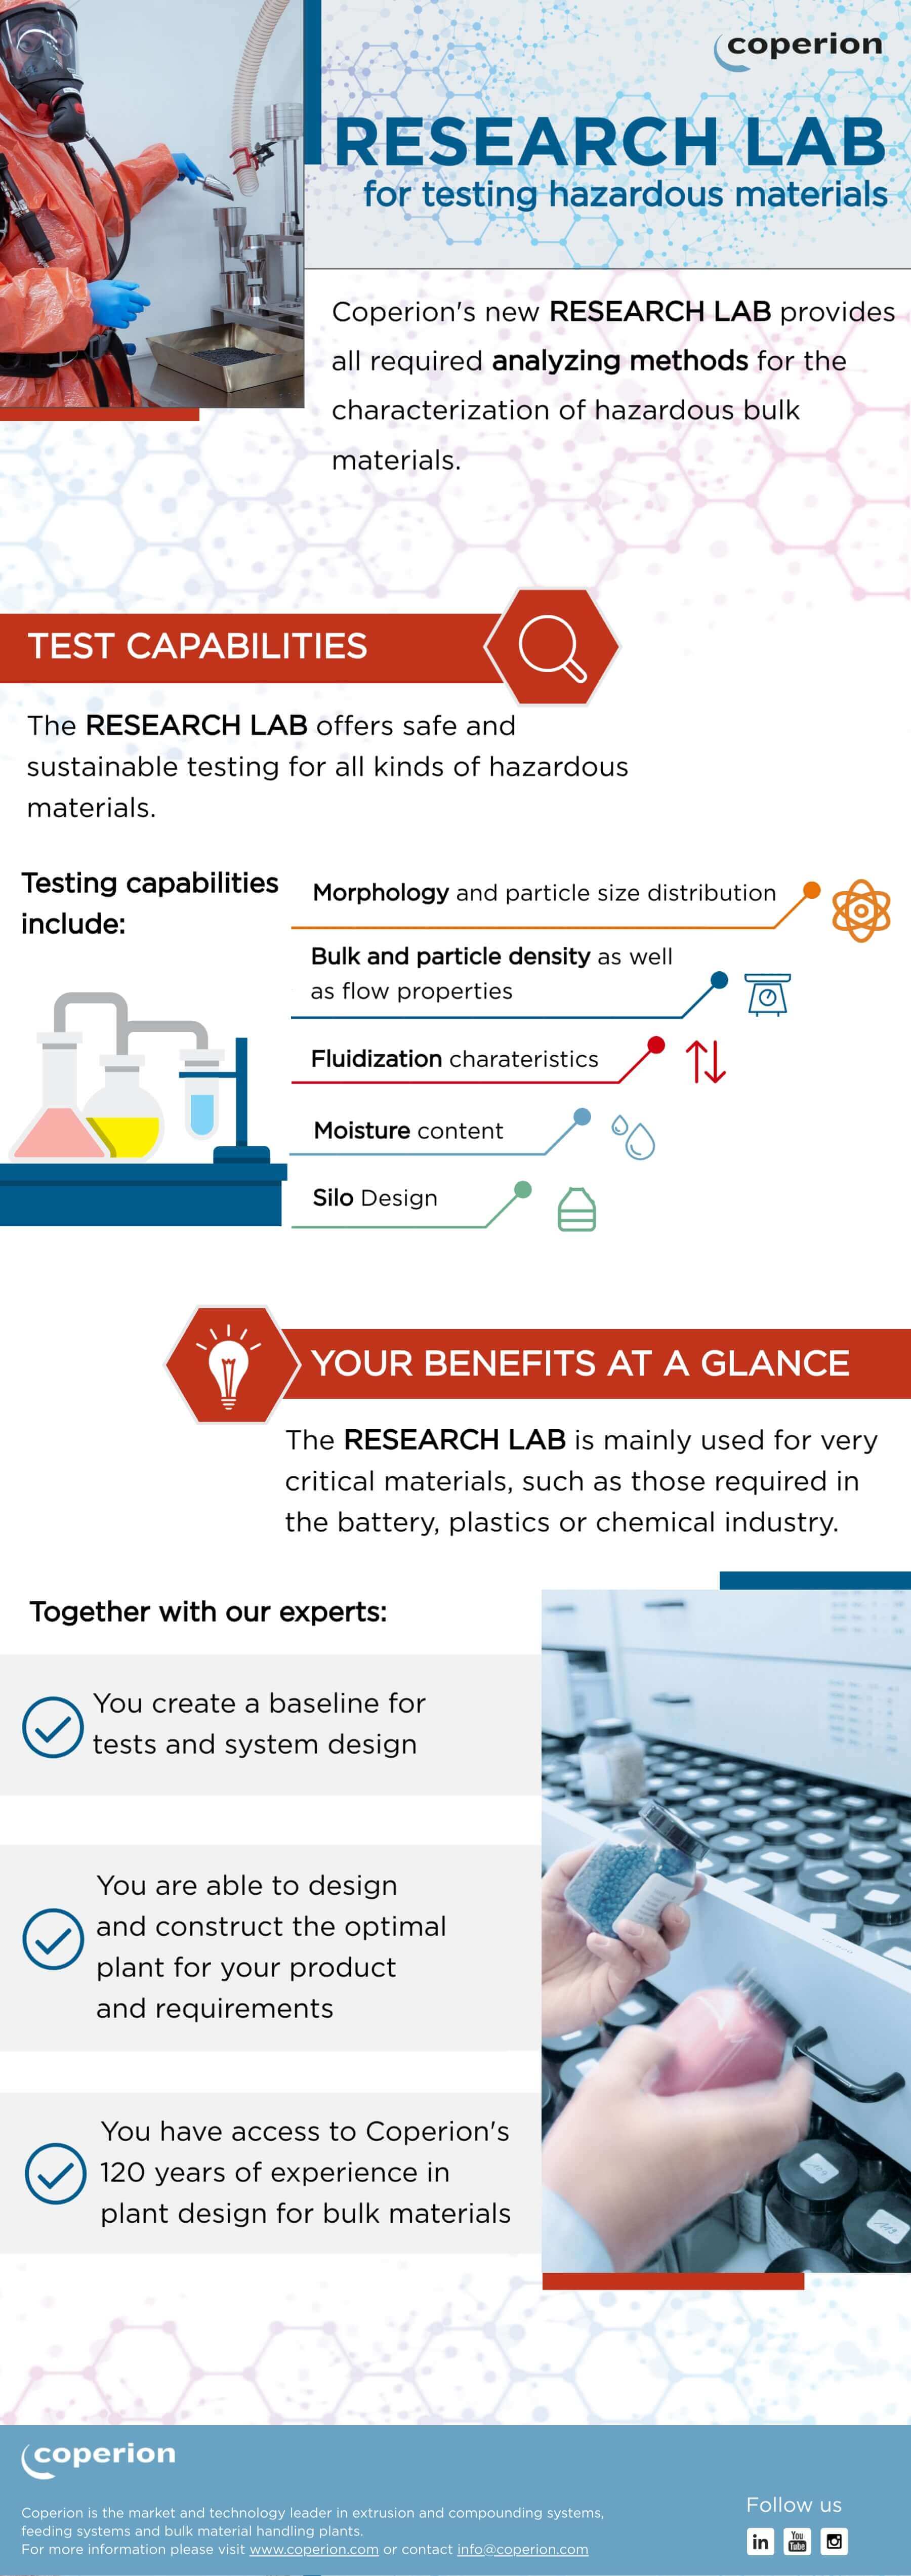 Research Lab for hazardous materials Infographic